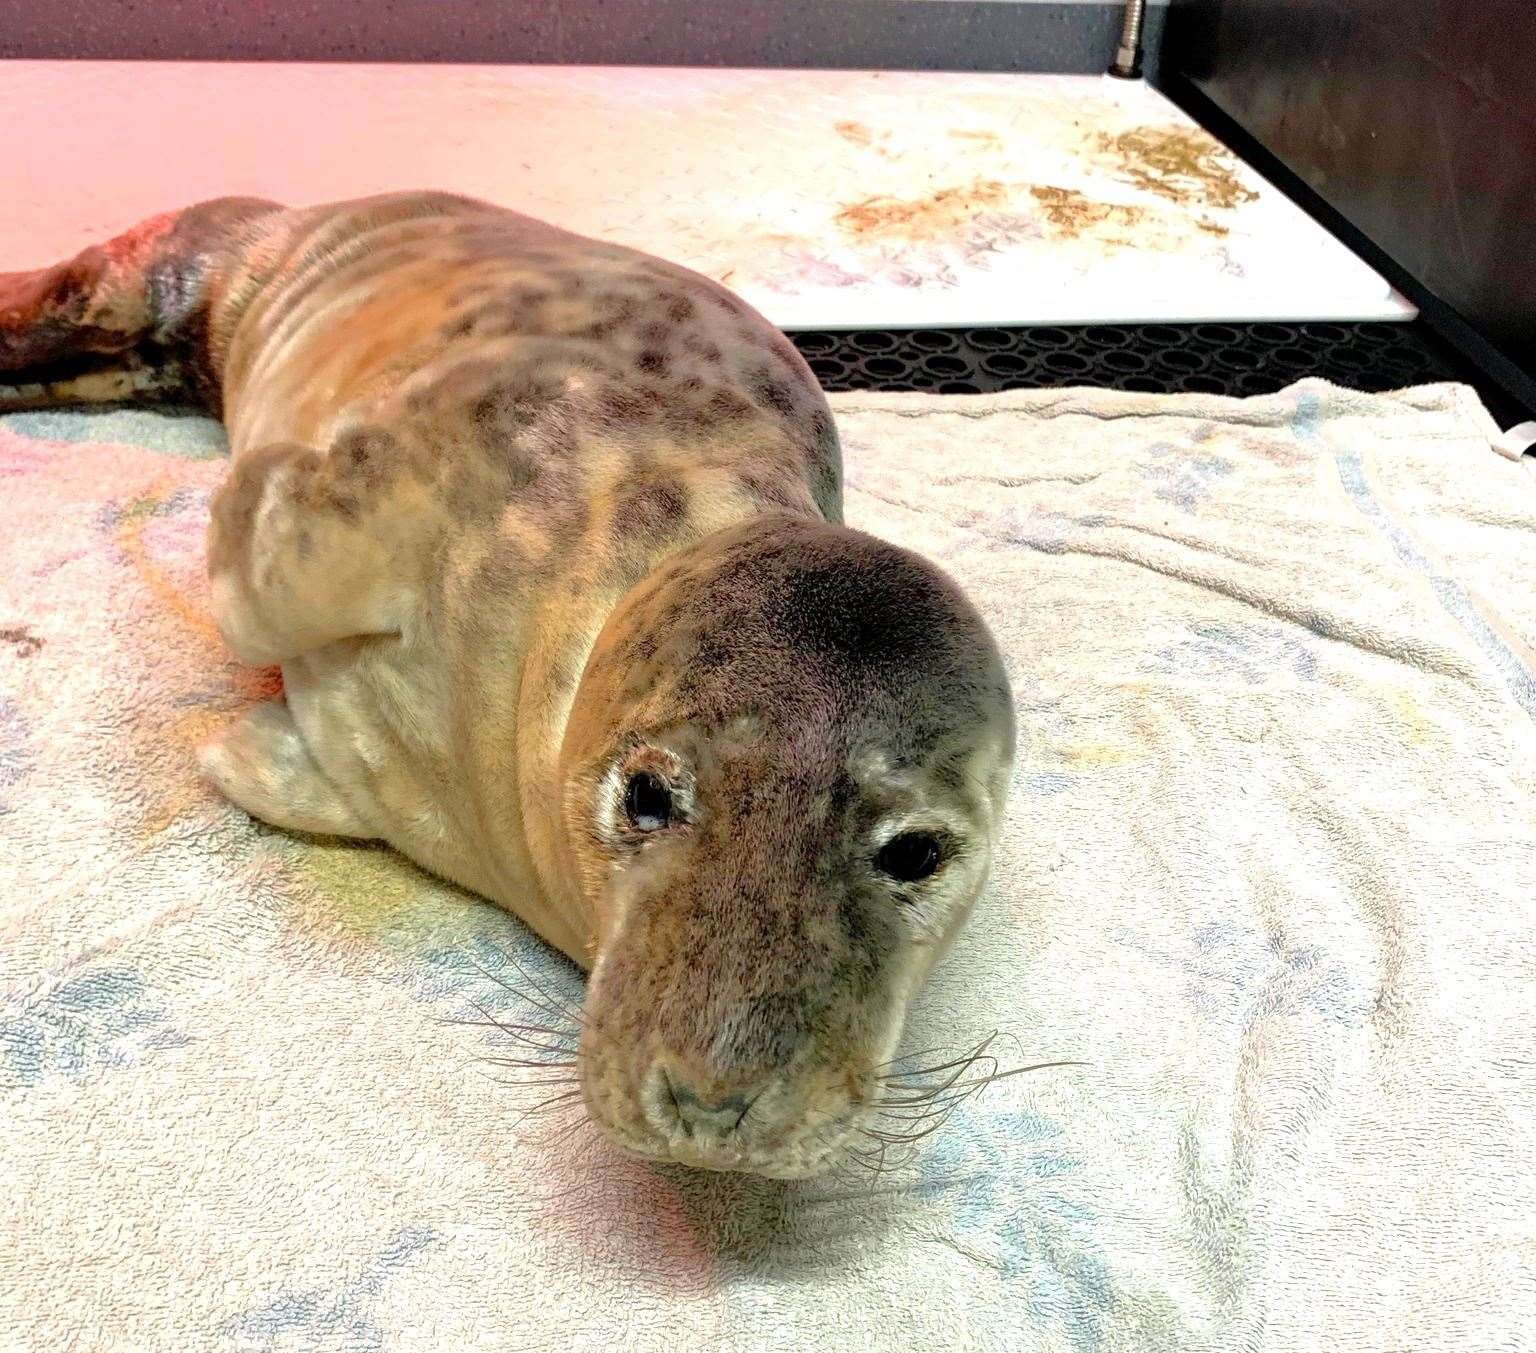 Jan is under the care of Caithness Seal Rehab and Release and is doing well thanks to the generosity of local people and companies like Jack's Flooring in Wick.